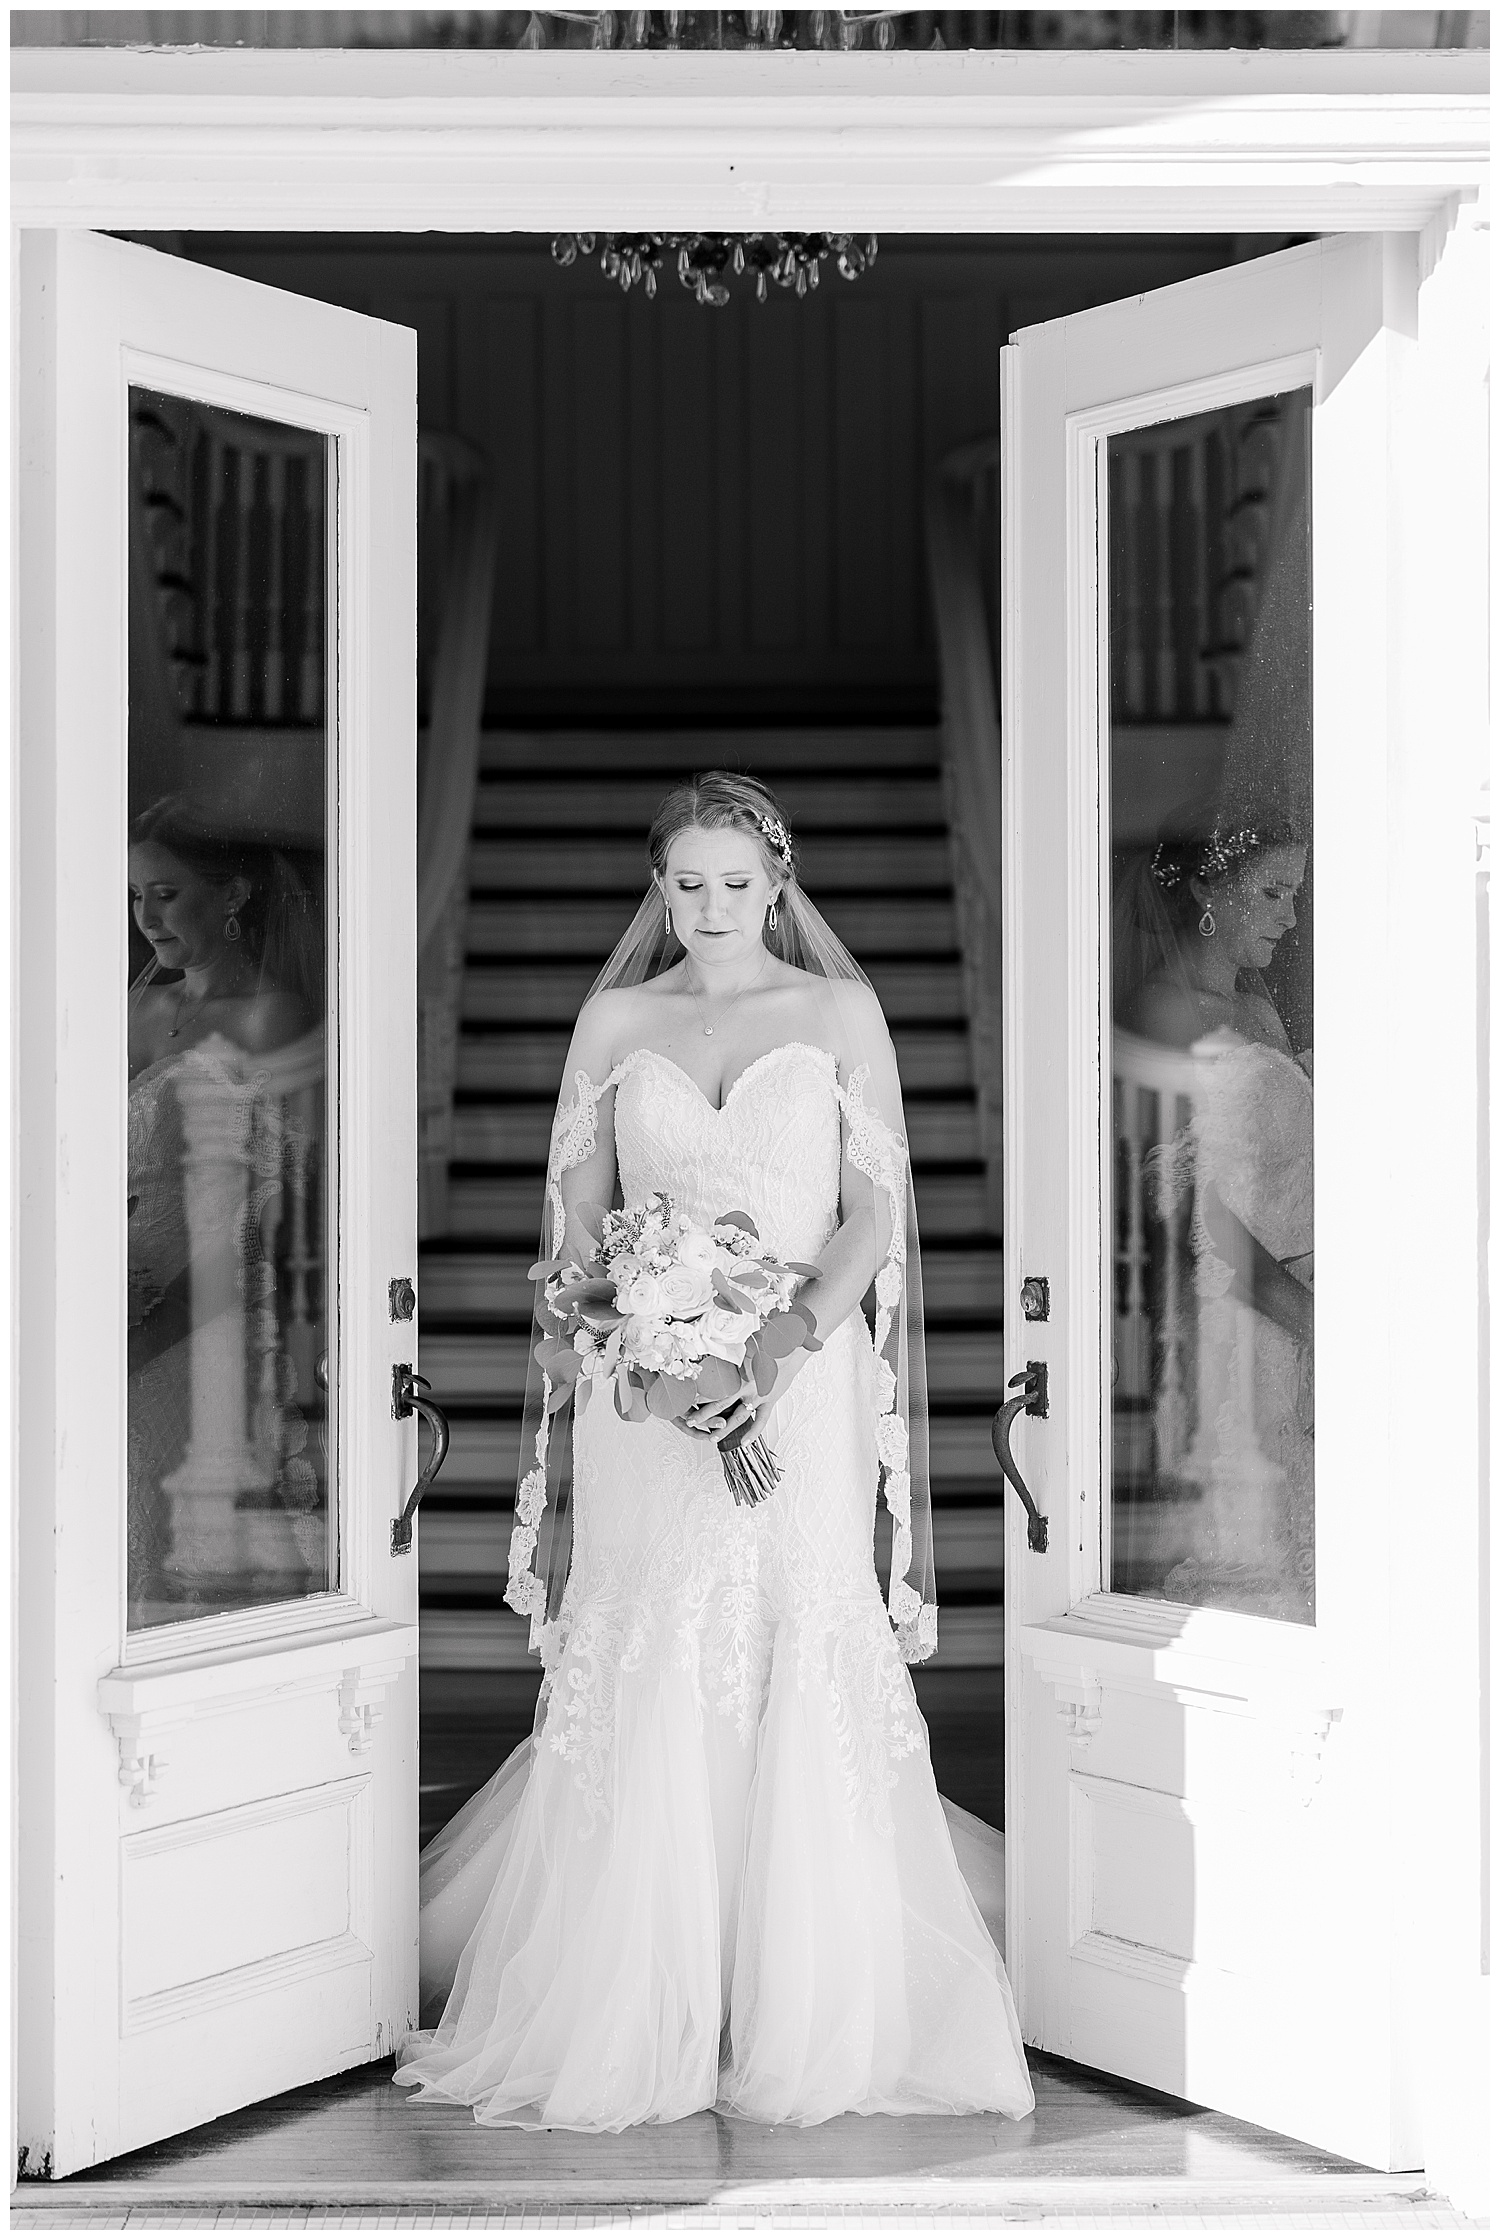 A bride and her reflection shows in the door at Butterfield Mansion.